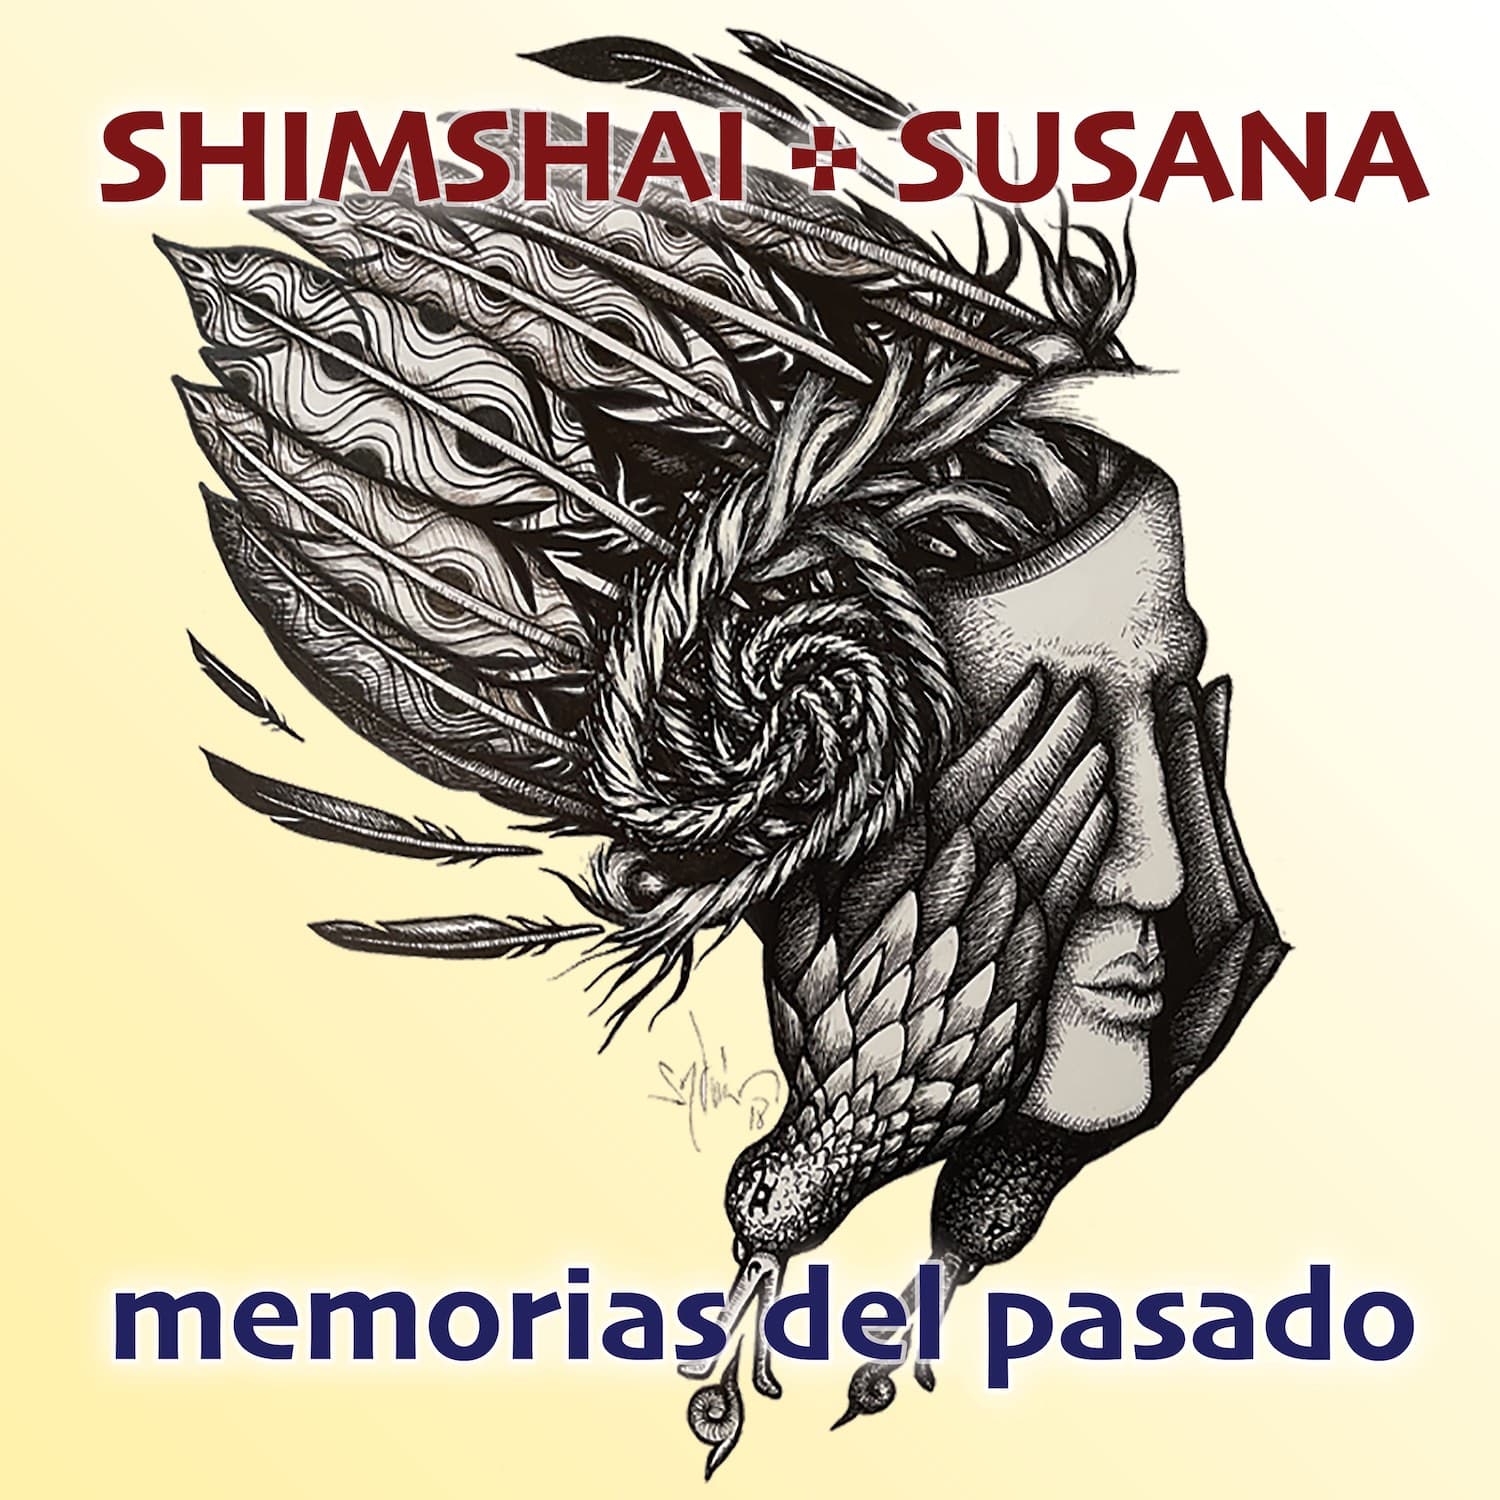 Memorias del Pasado traditional Mexhica prayer folk song medicine music from Mexico arranged by Shimshai and released by Shimshai & Susana. 